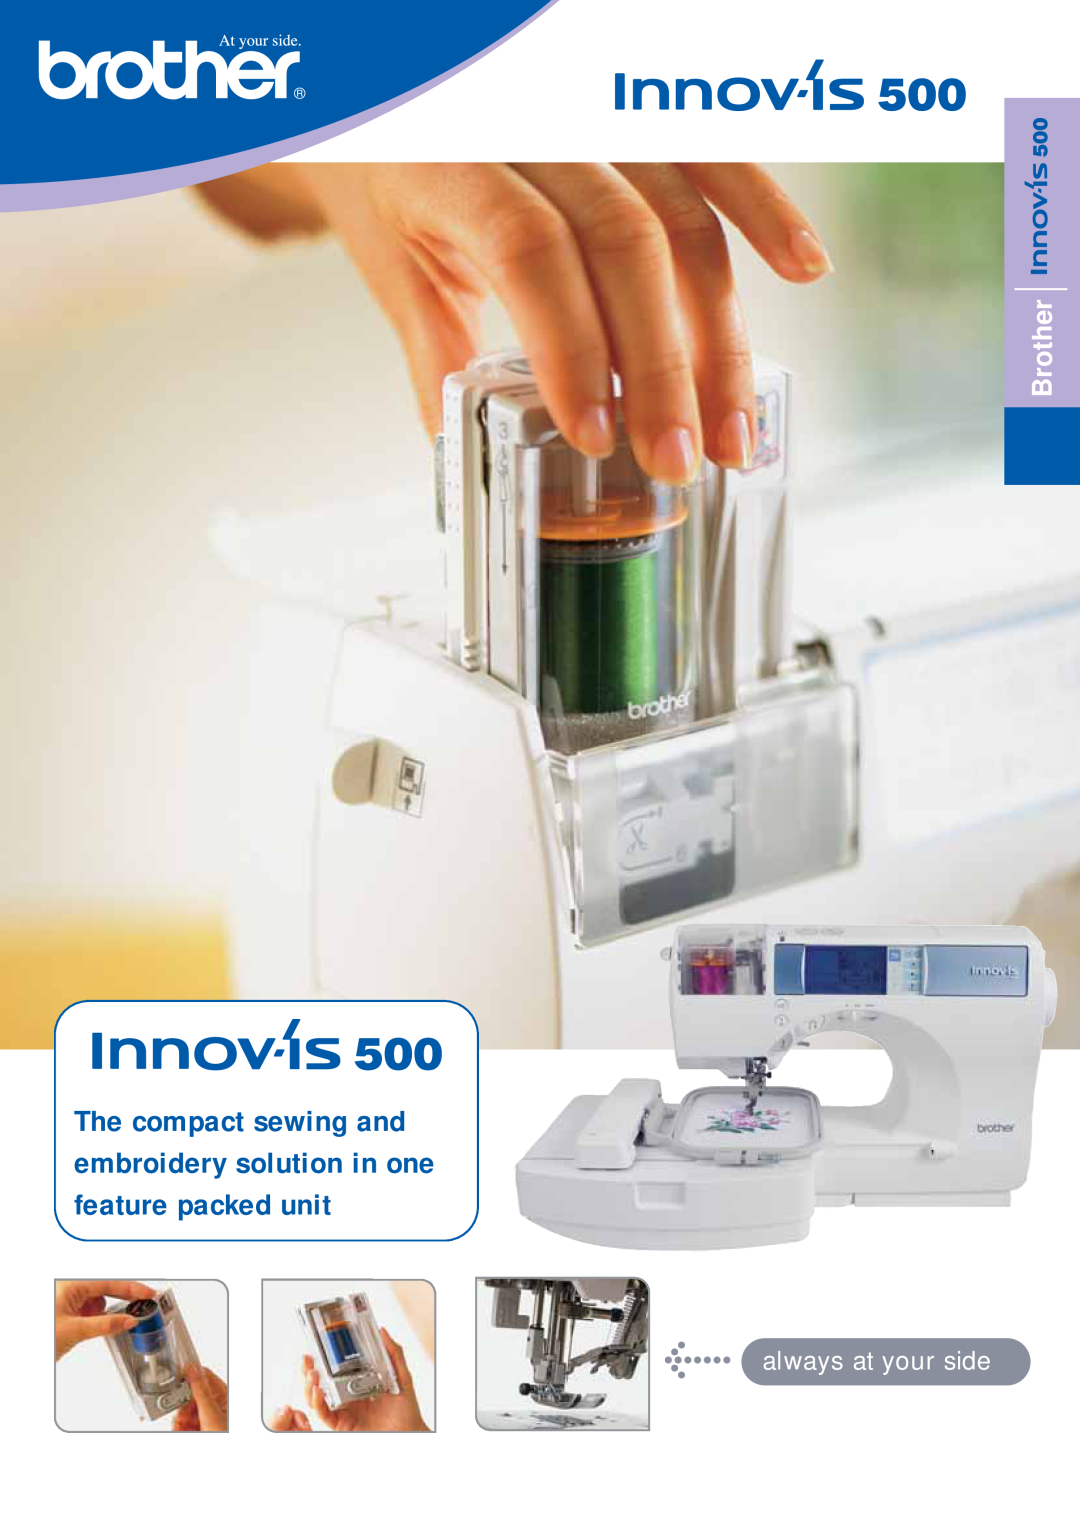 Brother INNOVIS 500 manual The compact sewing and embroidery solution in one feature packed unit, Brother 